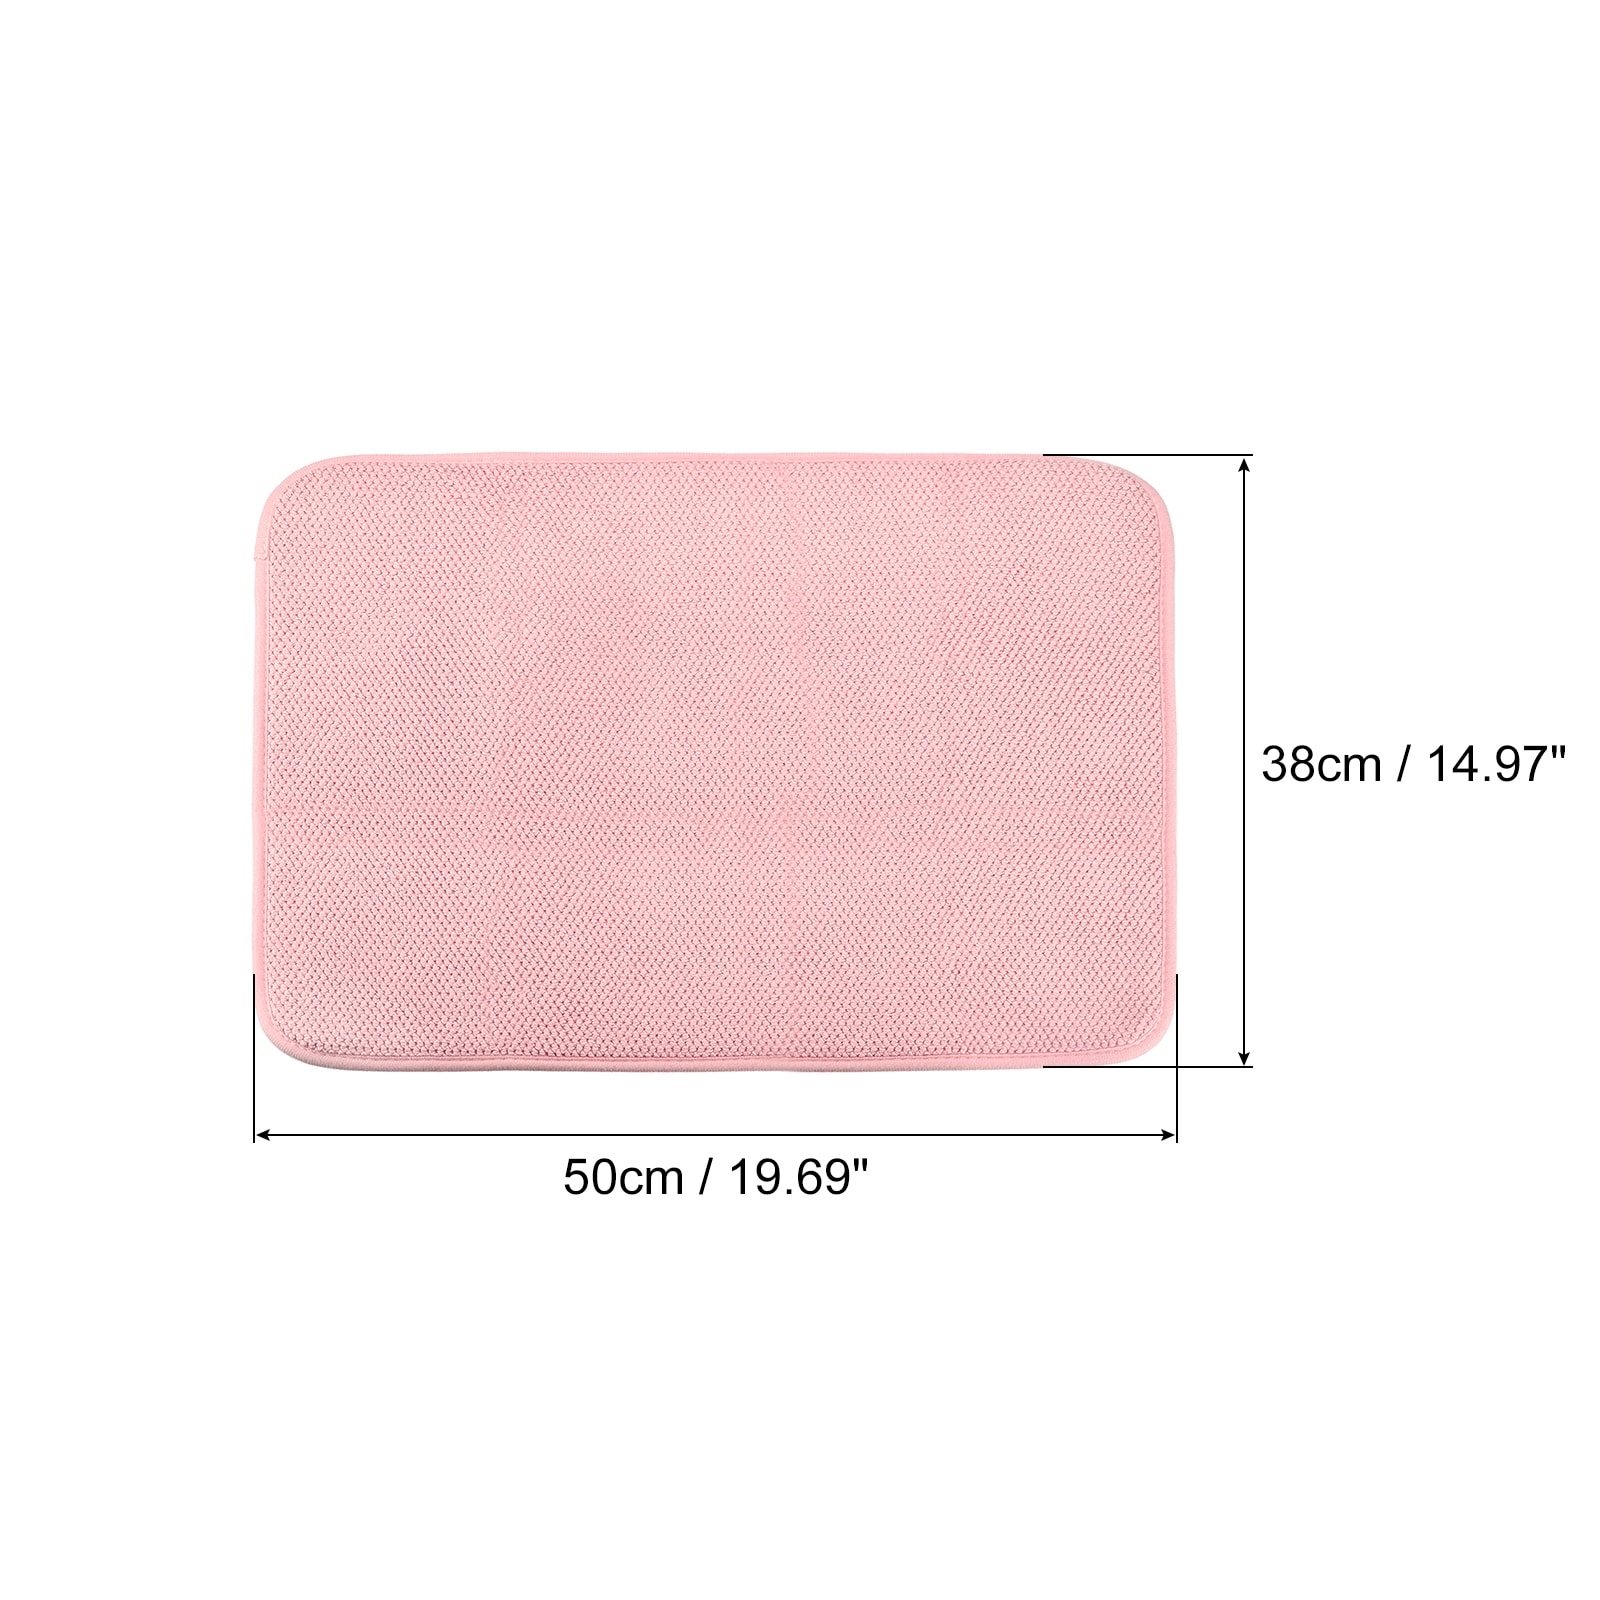 Pink and Cream Floral Kitchen Dish Drying Mat